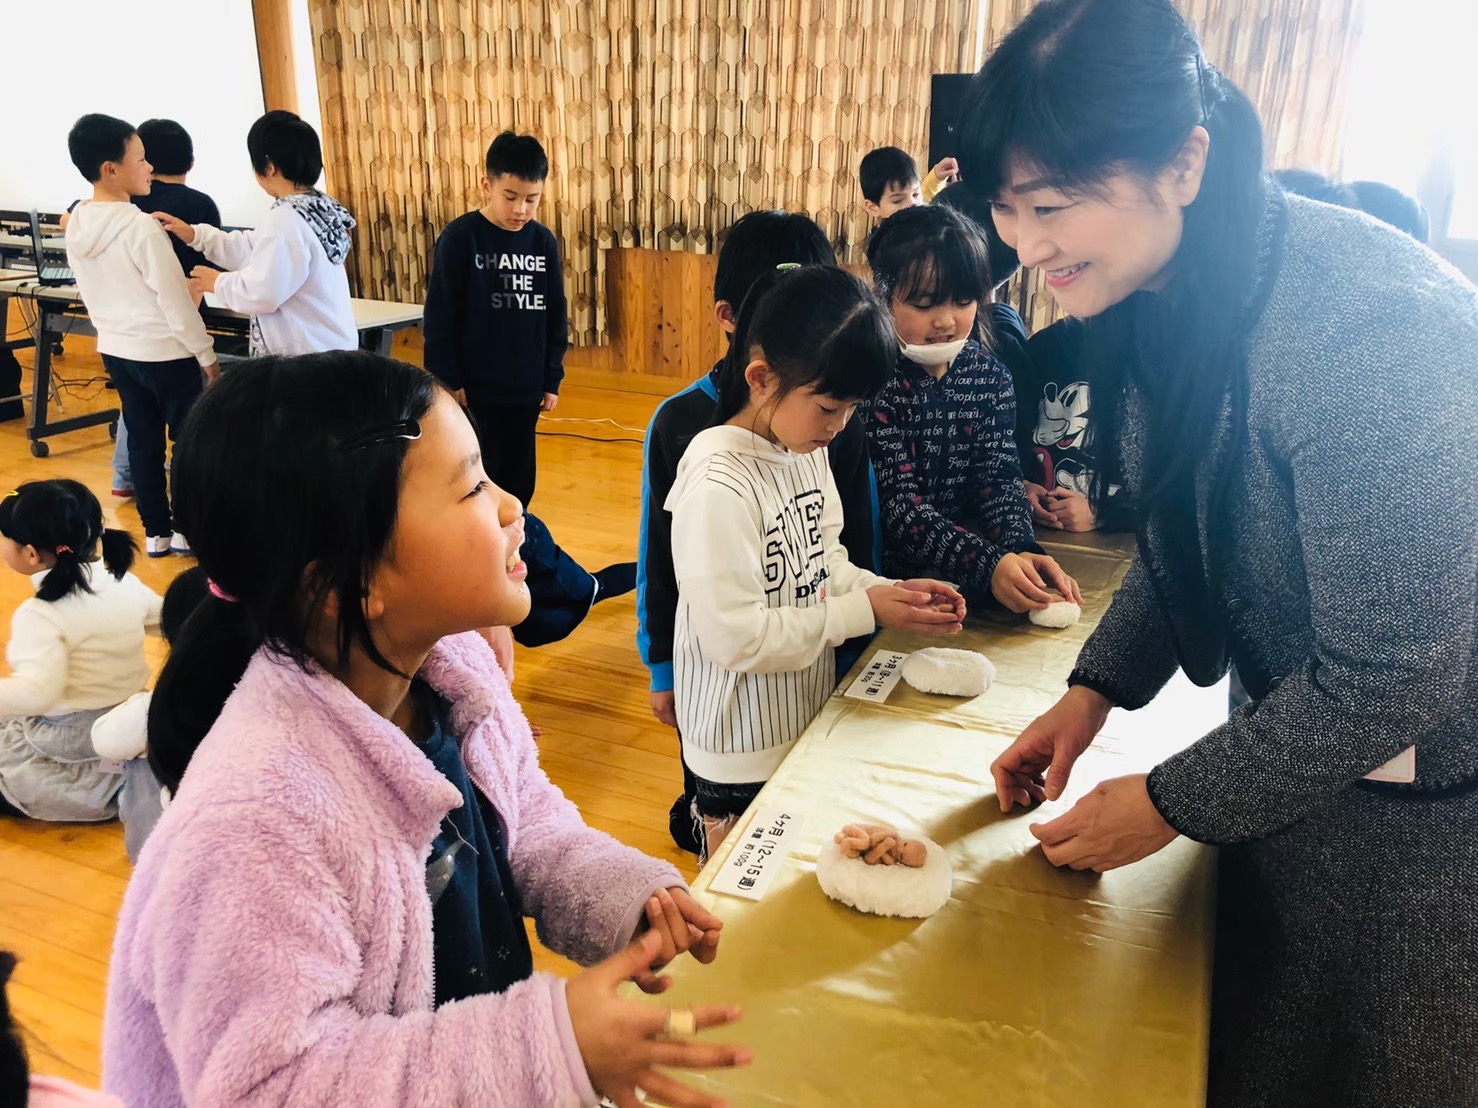 Hands-on School Life Education Program on Human Childbirth in Collaboration with Midwives: Developing a Lesson Model and Evaluating its Effectiveness<br>Mitsutake Tomomi, Assistant Professor<br>Faculty of Human Sciences, Department of Nursing